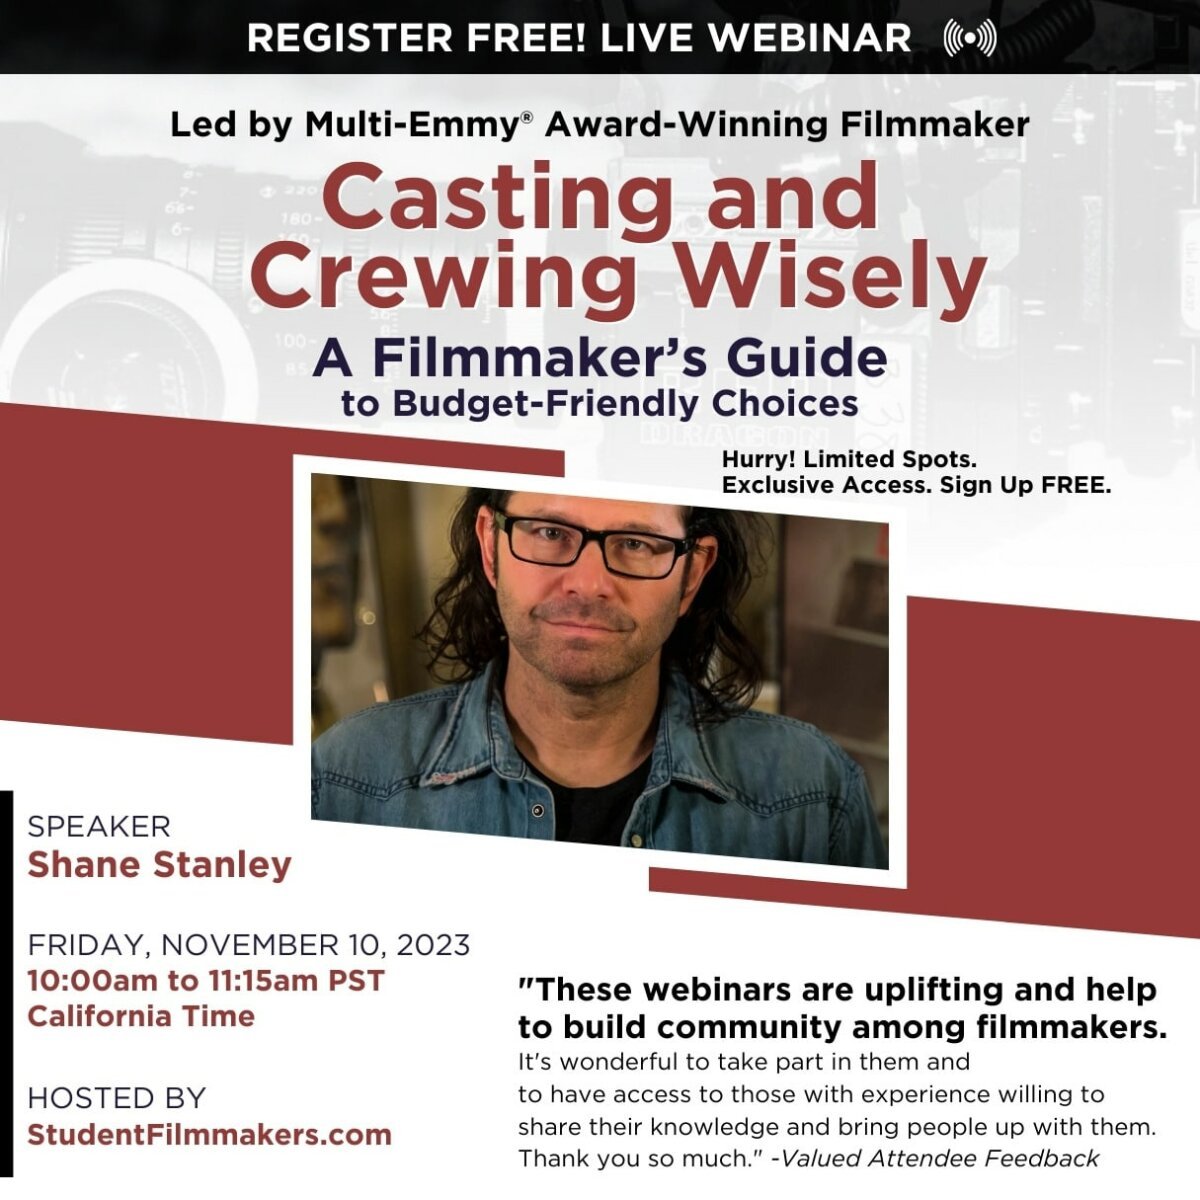 "Casting and Crewing Wisely: A Filmmaker's Guide to Budget-Friendly Choices" with Multi-Emmy® Award-Winning Filmmaker Shane Stanley